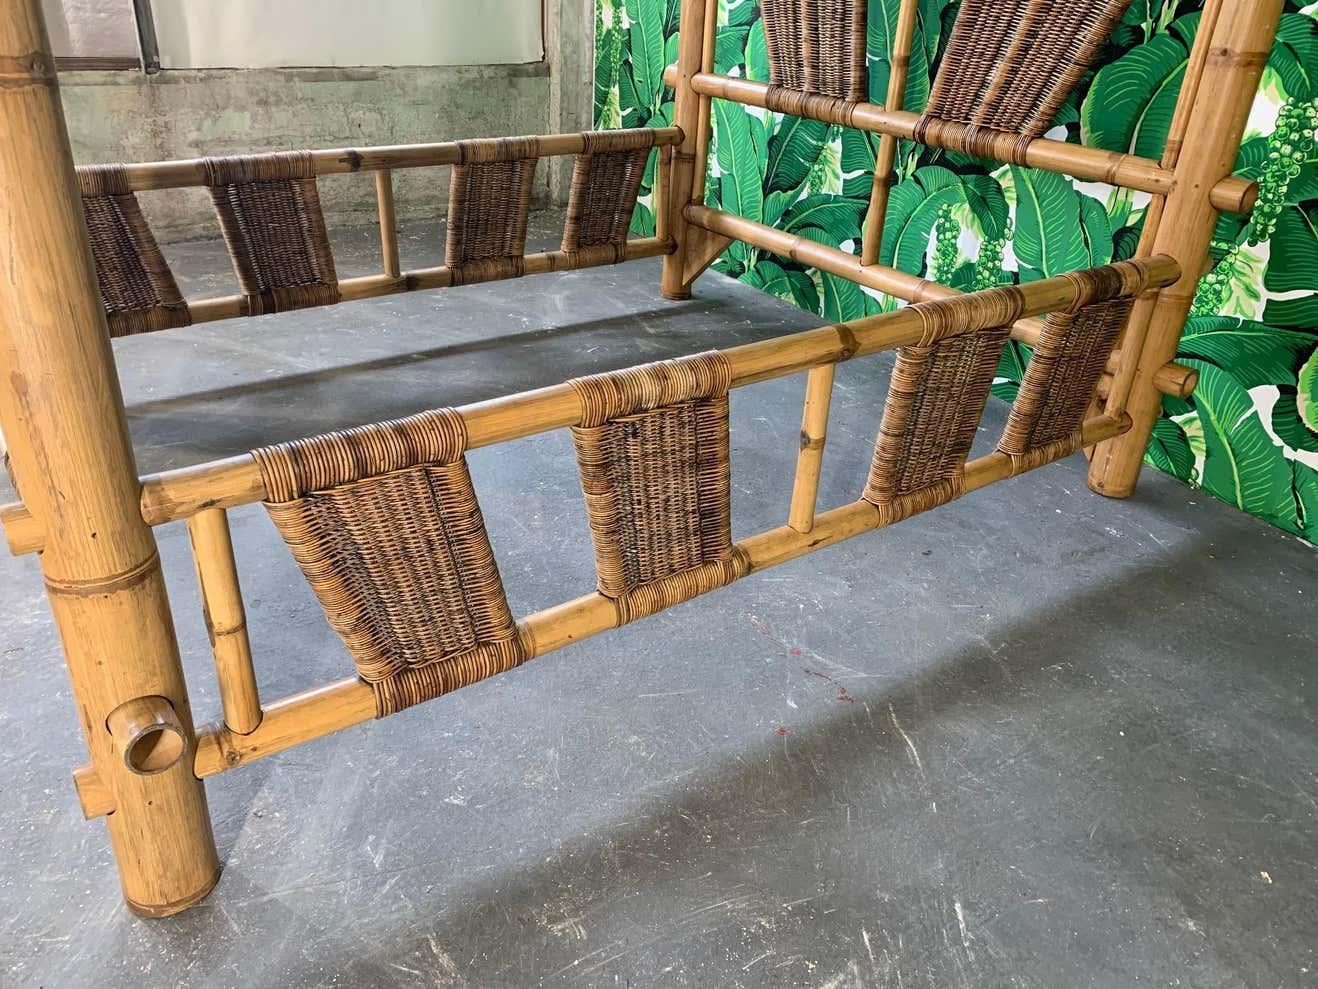 Bamboo and Rattan Queen Size Canopy Bed In Good Condition For Sale In Jacksonville, FL